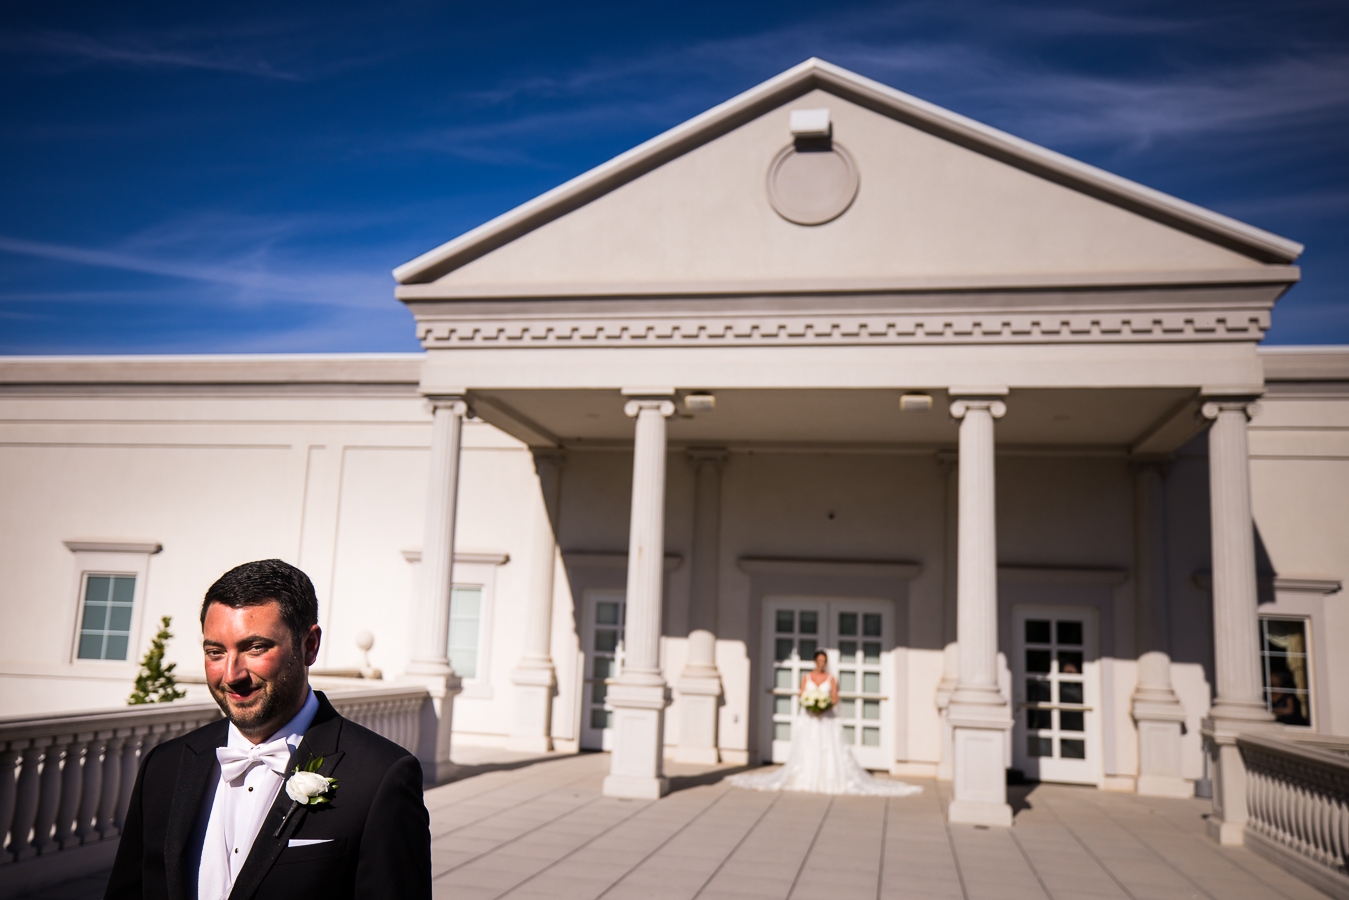 luxury nj wedding photographer, lisa rhinehart, captures this vibrant image of the groom smiling as his bride stands behind him in her wedding gown as they get ready to see each other for the first time during their first look outside of the palace at somerset park 